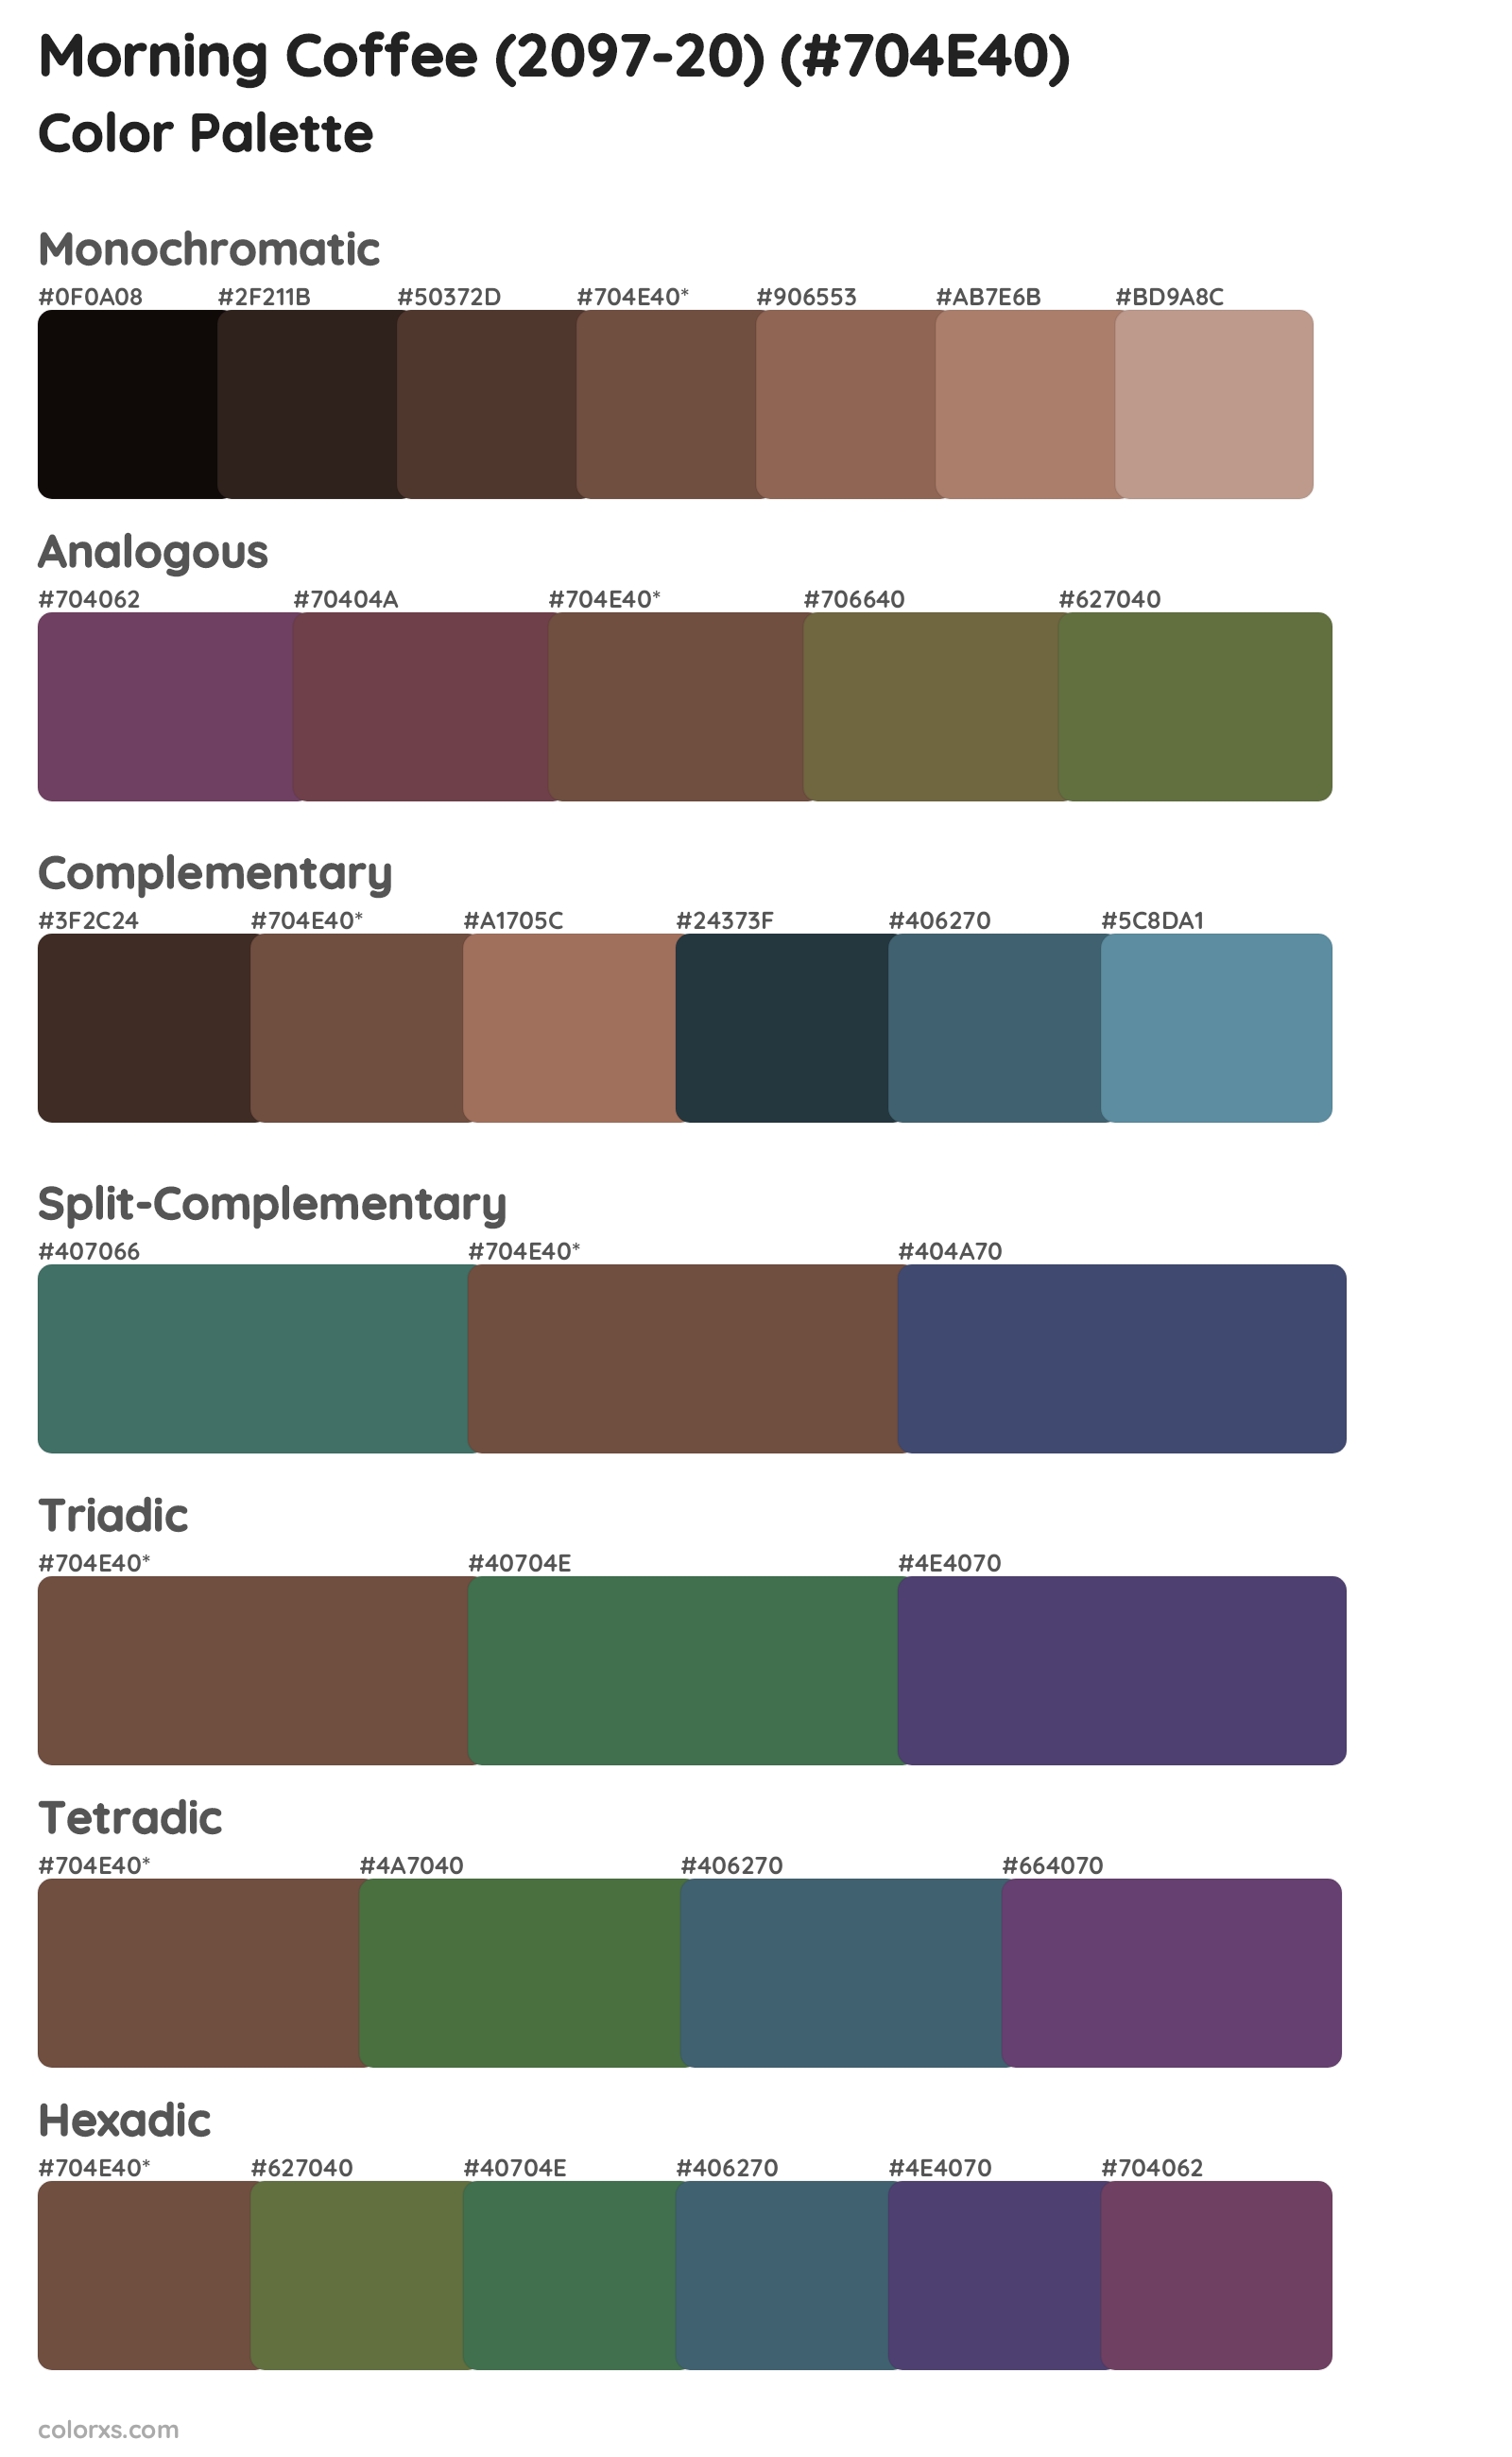 Morning Coffee (2097-20) Color Scheme Palettes